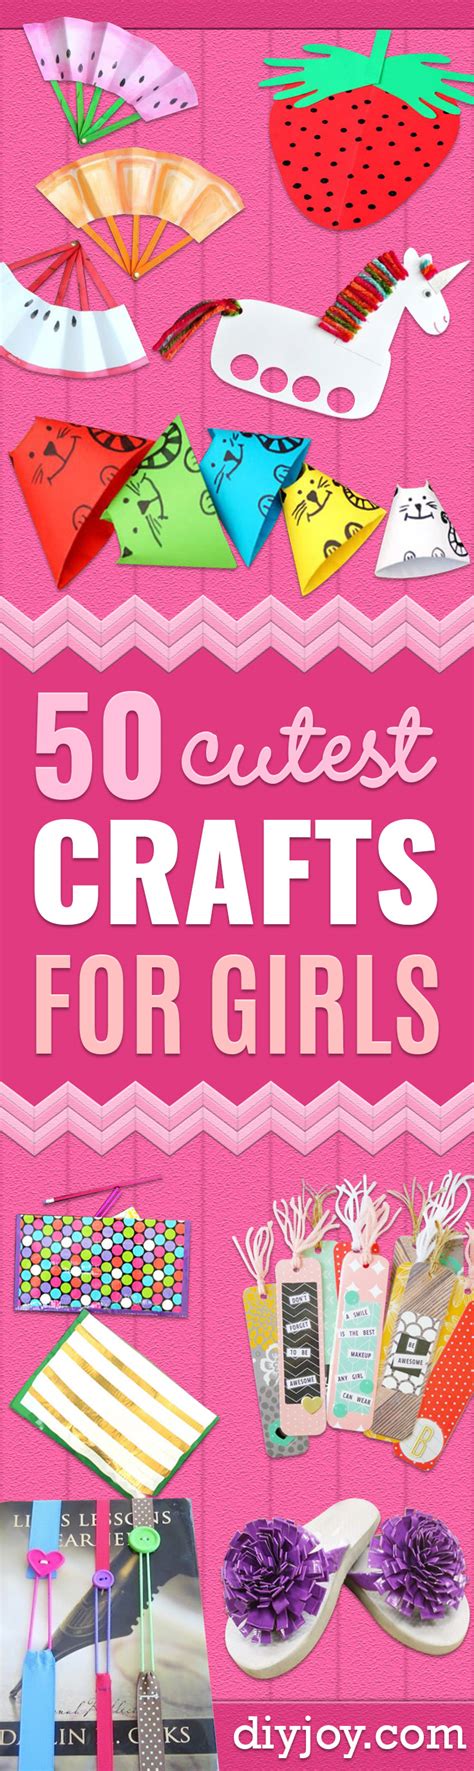 diy projects for girls